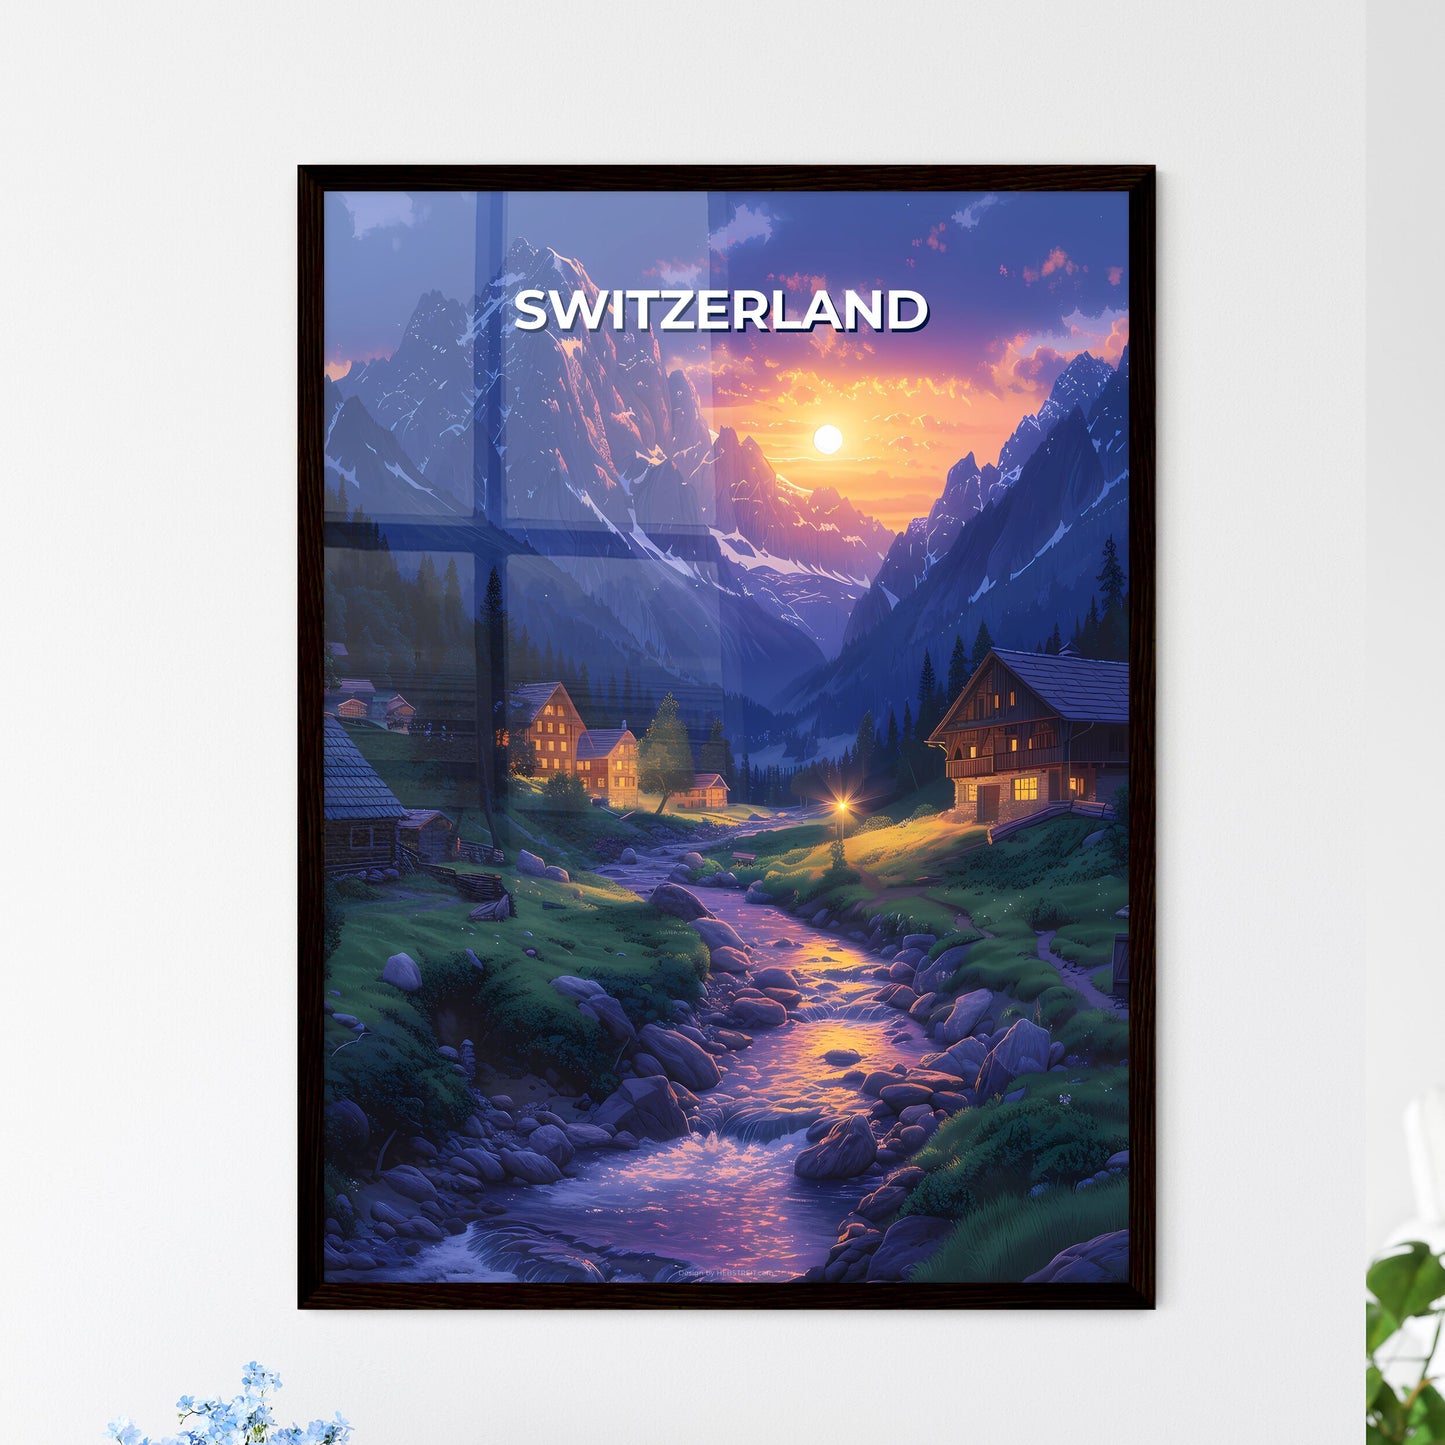 Artistic Mountain Landscape Painting: Swiss Alps with River and Houses, Europe